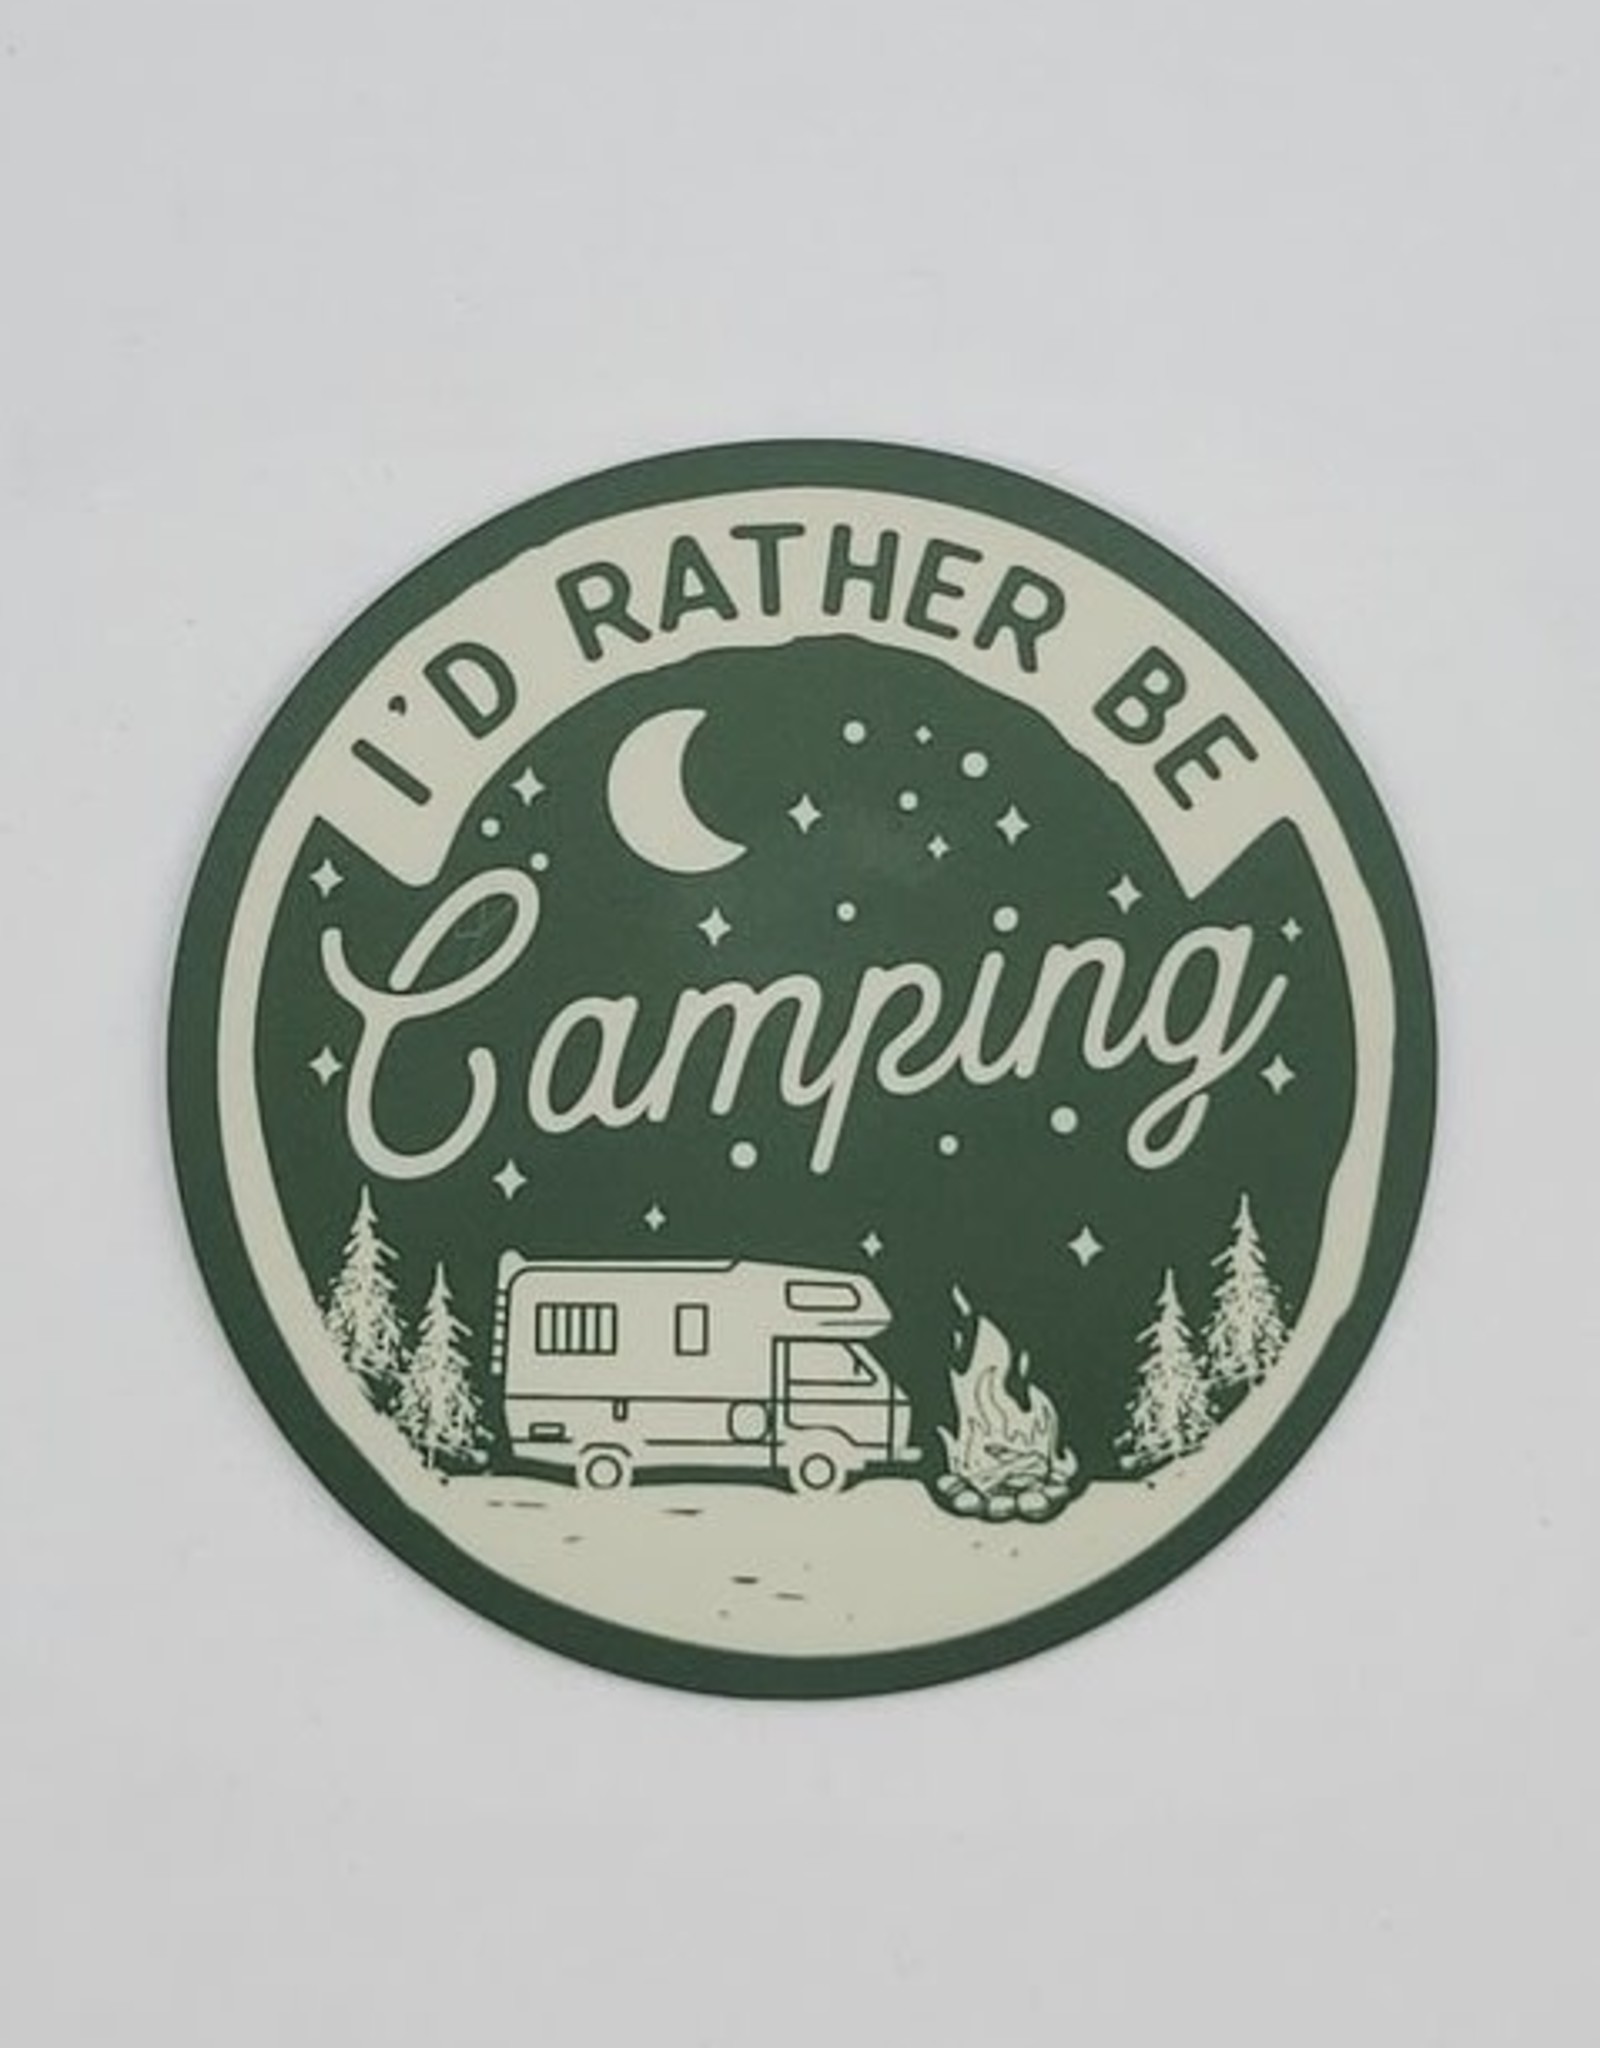 White I'd Rather Be Camping Decals for Tumblers Car Truck Tablet Cell Phone  - Set of 2 Camping Stickers for Cars - Camping Tumbler Decal - White